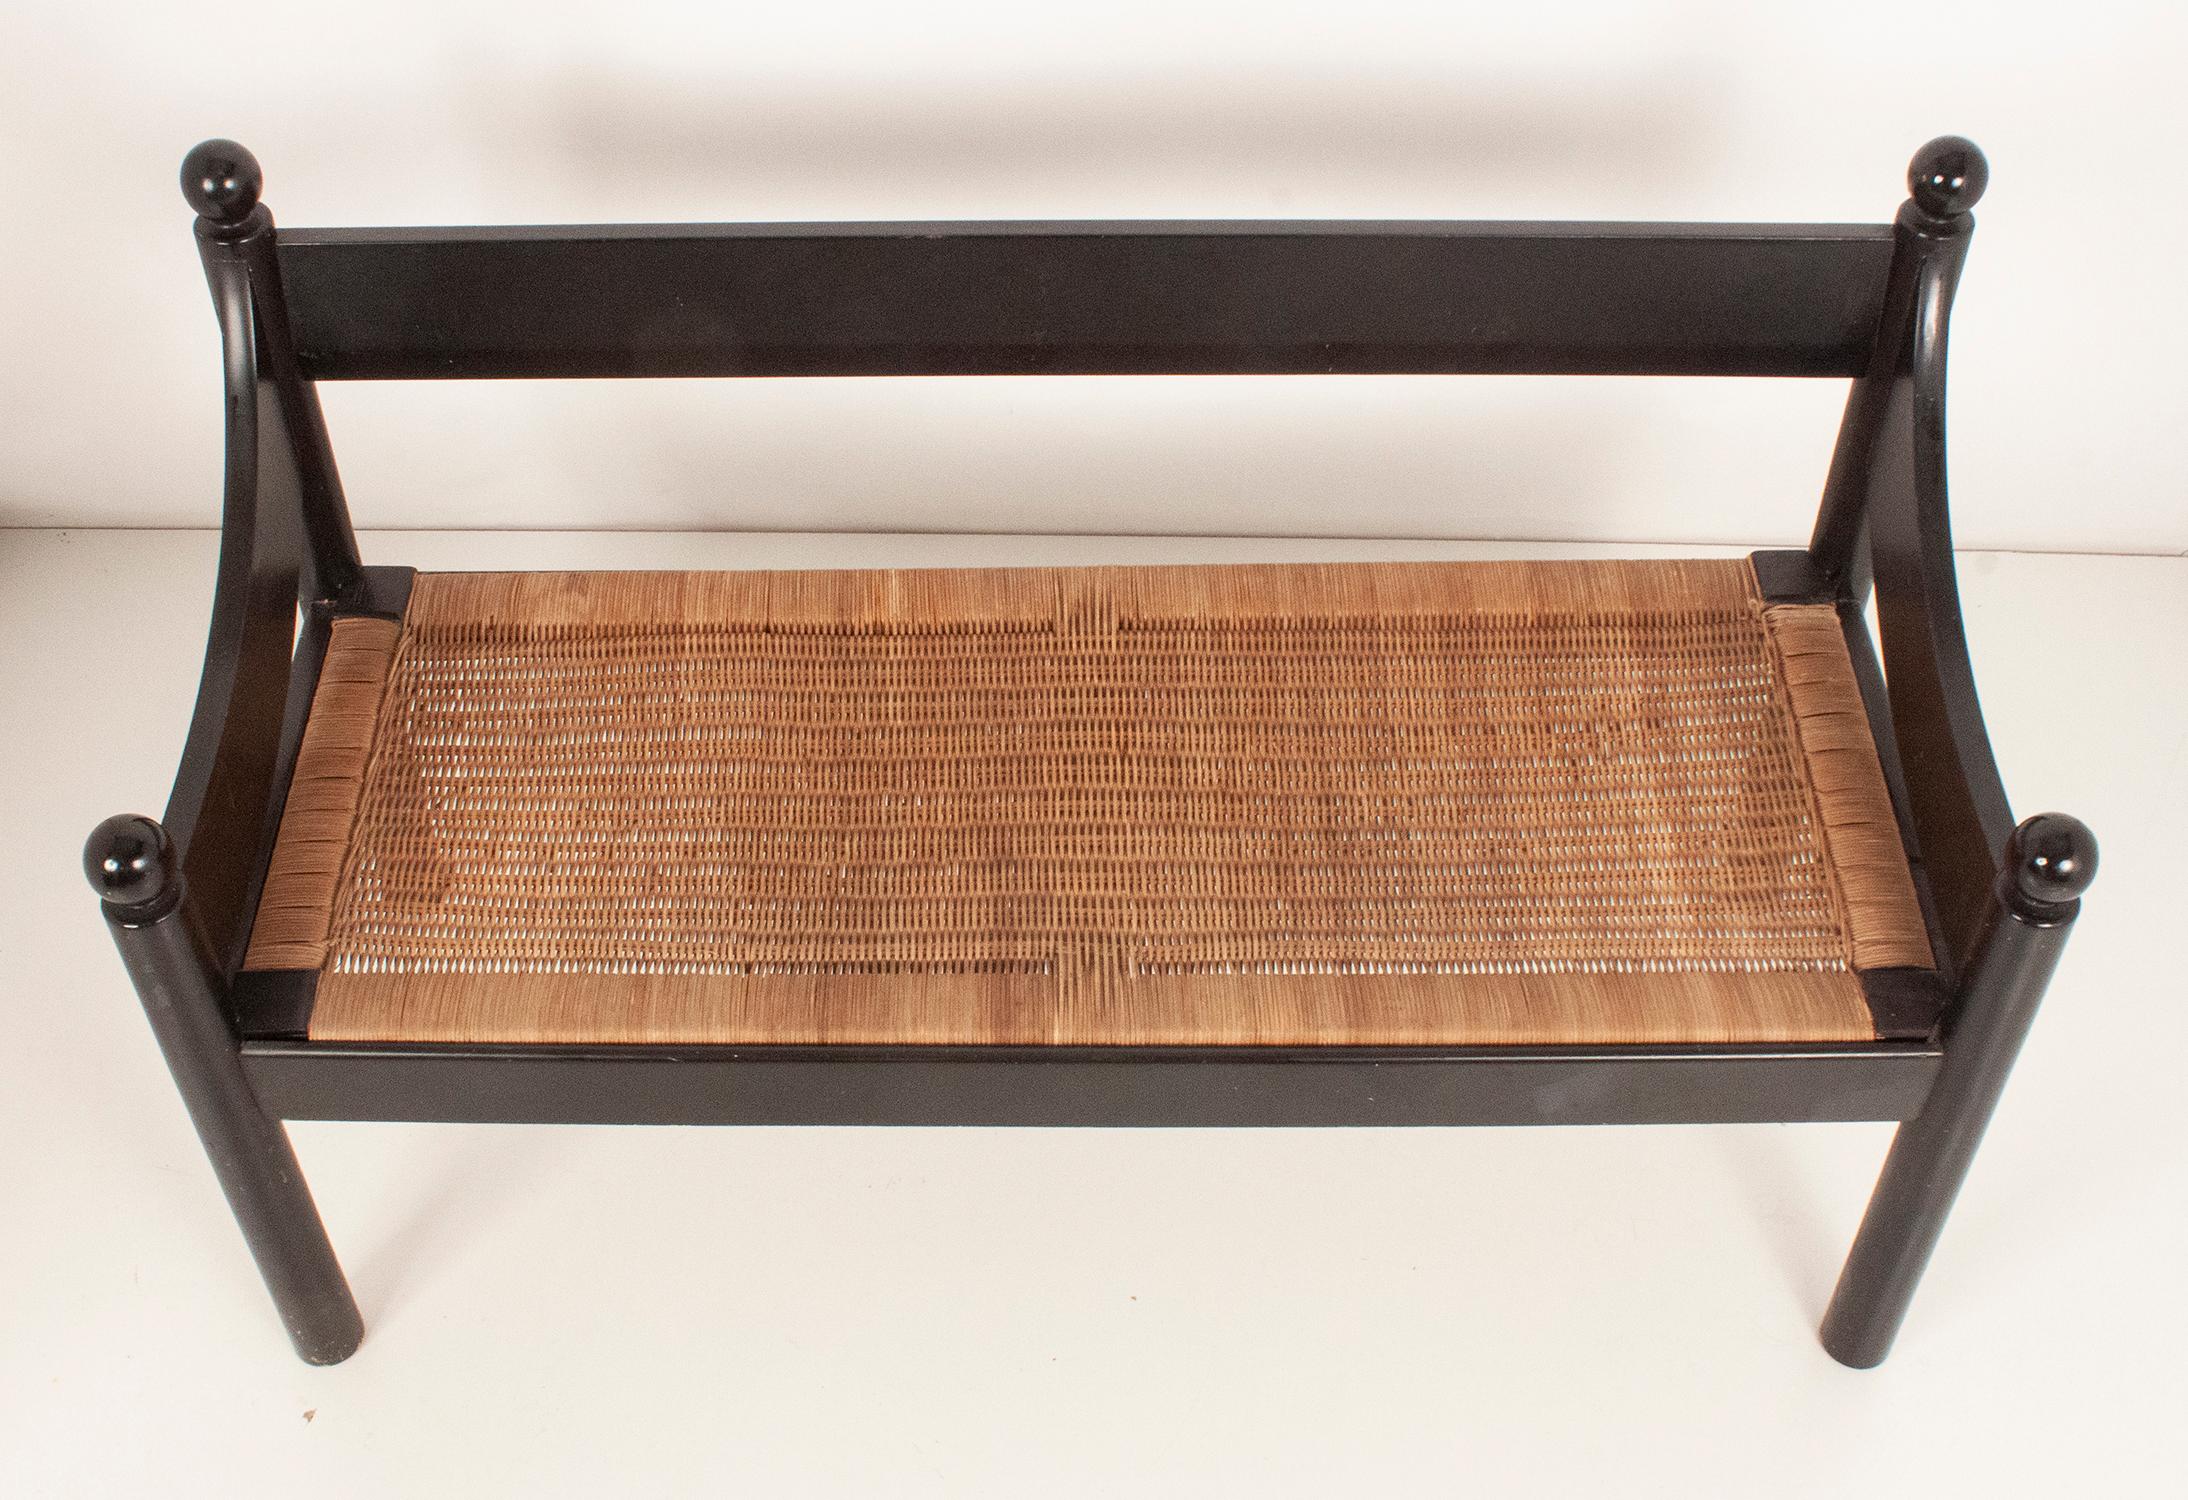 Late 20th Century Bench in Black Lacquered Wood and Rush, by Joaquin Belsa, Spain 1970's